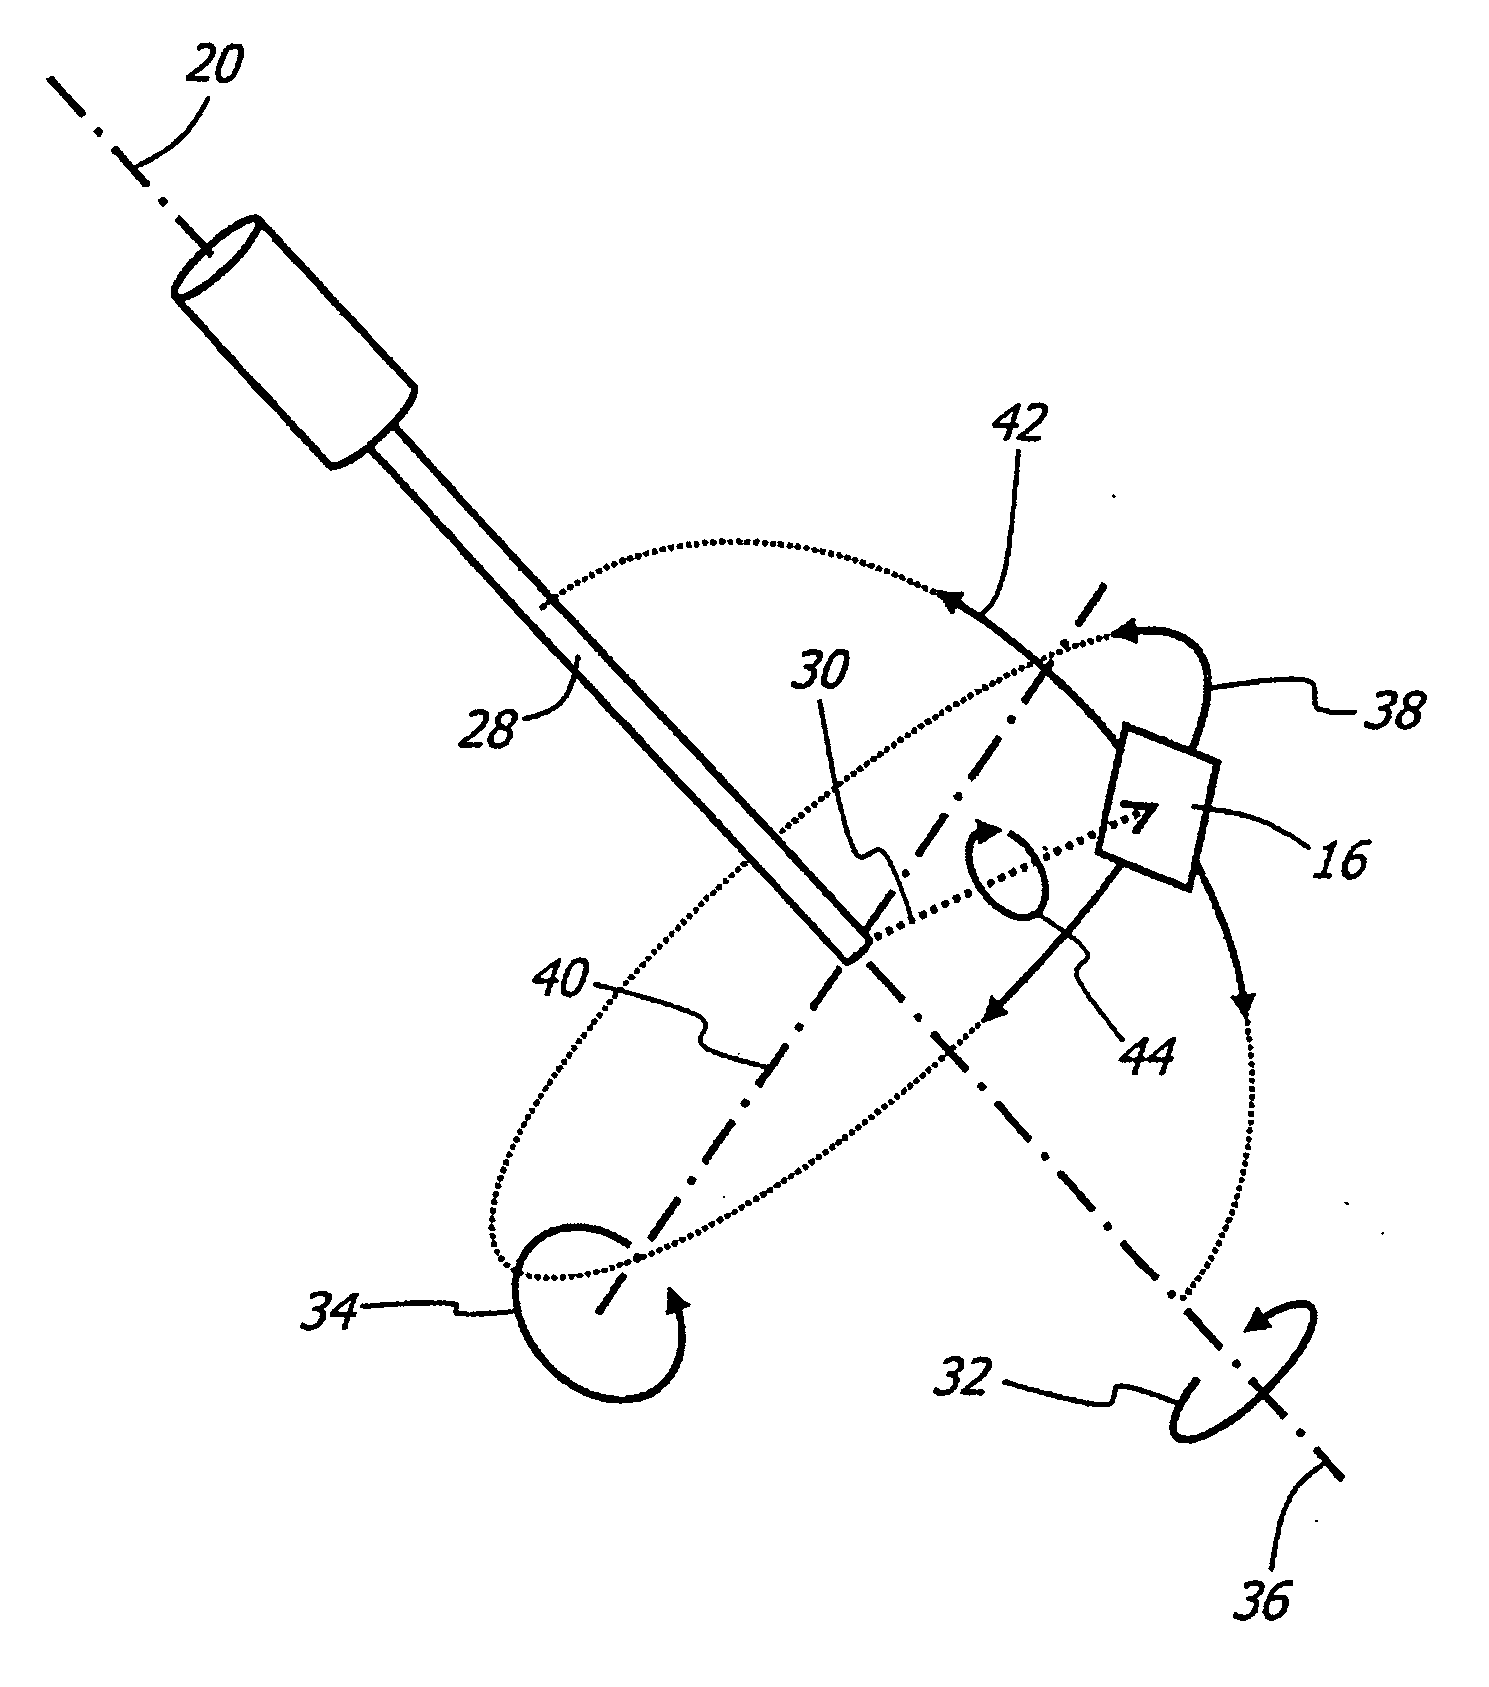 Illumination system for variable direction of view instruments